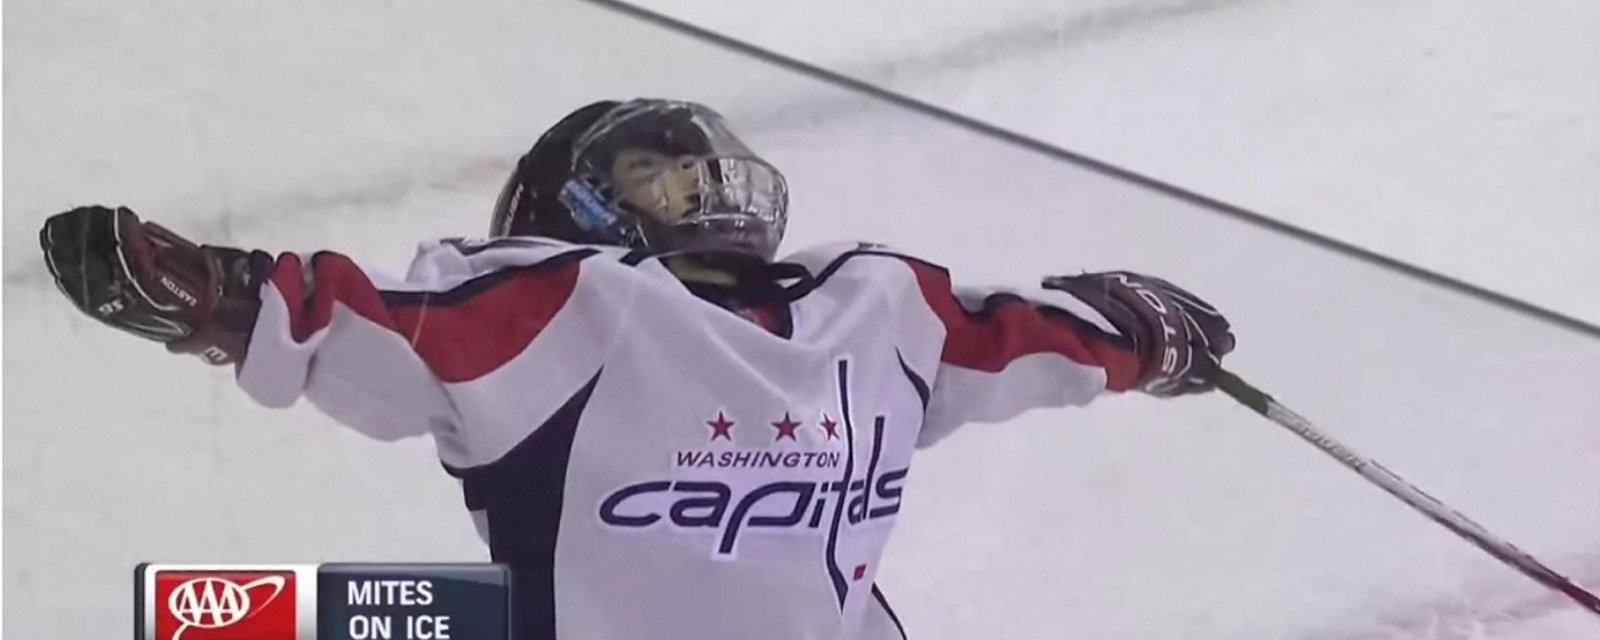 Little Mite player scores during intermission and has the best celebration ever!